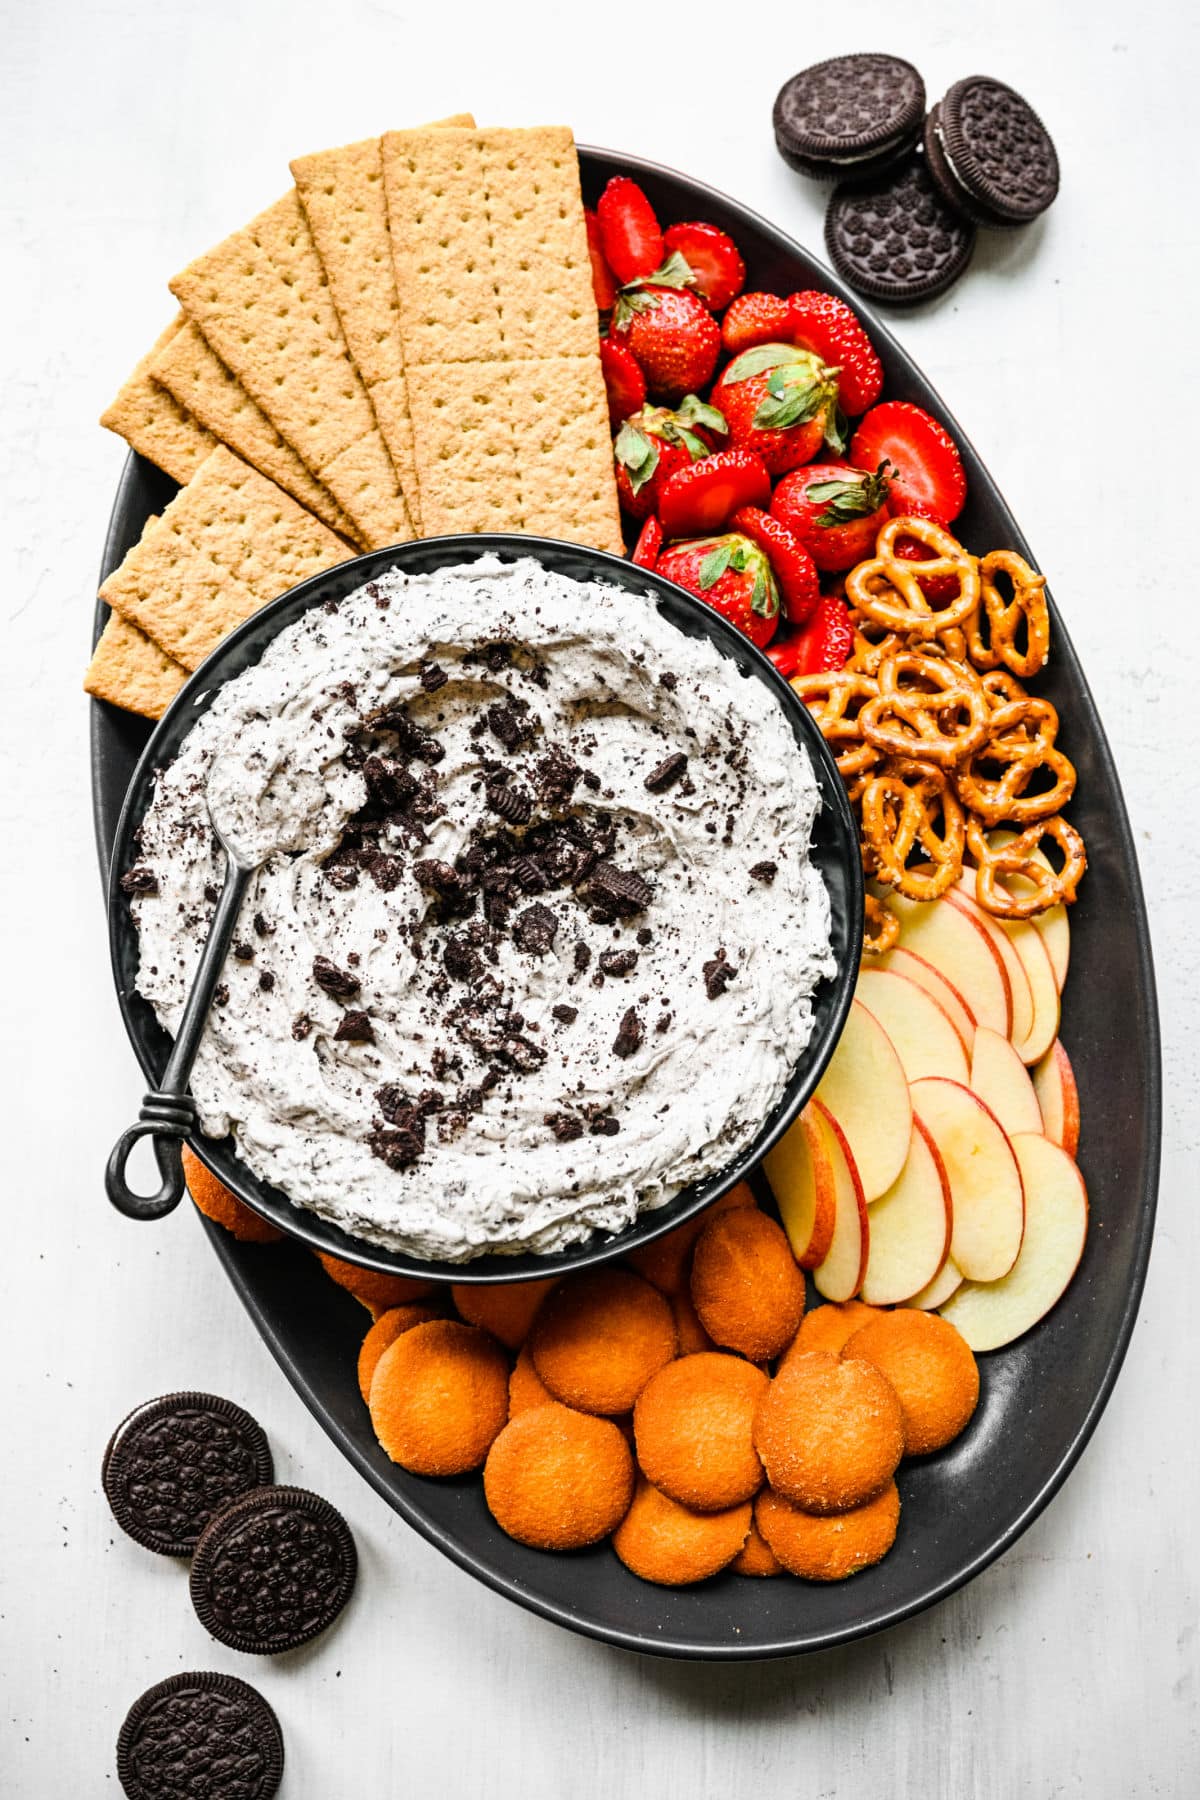 A bowl of Oreo fluff surrounded by graham crackers, fruit, Nilla wafers, and pretzels.